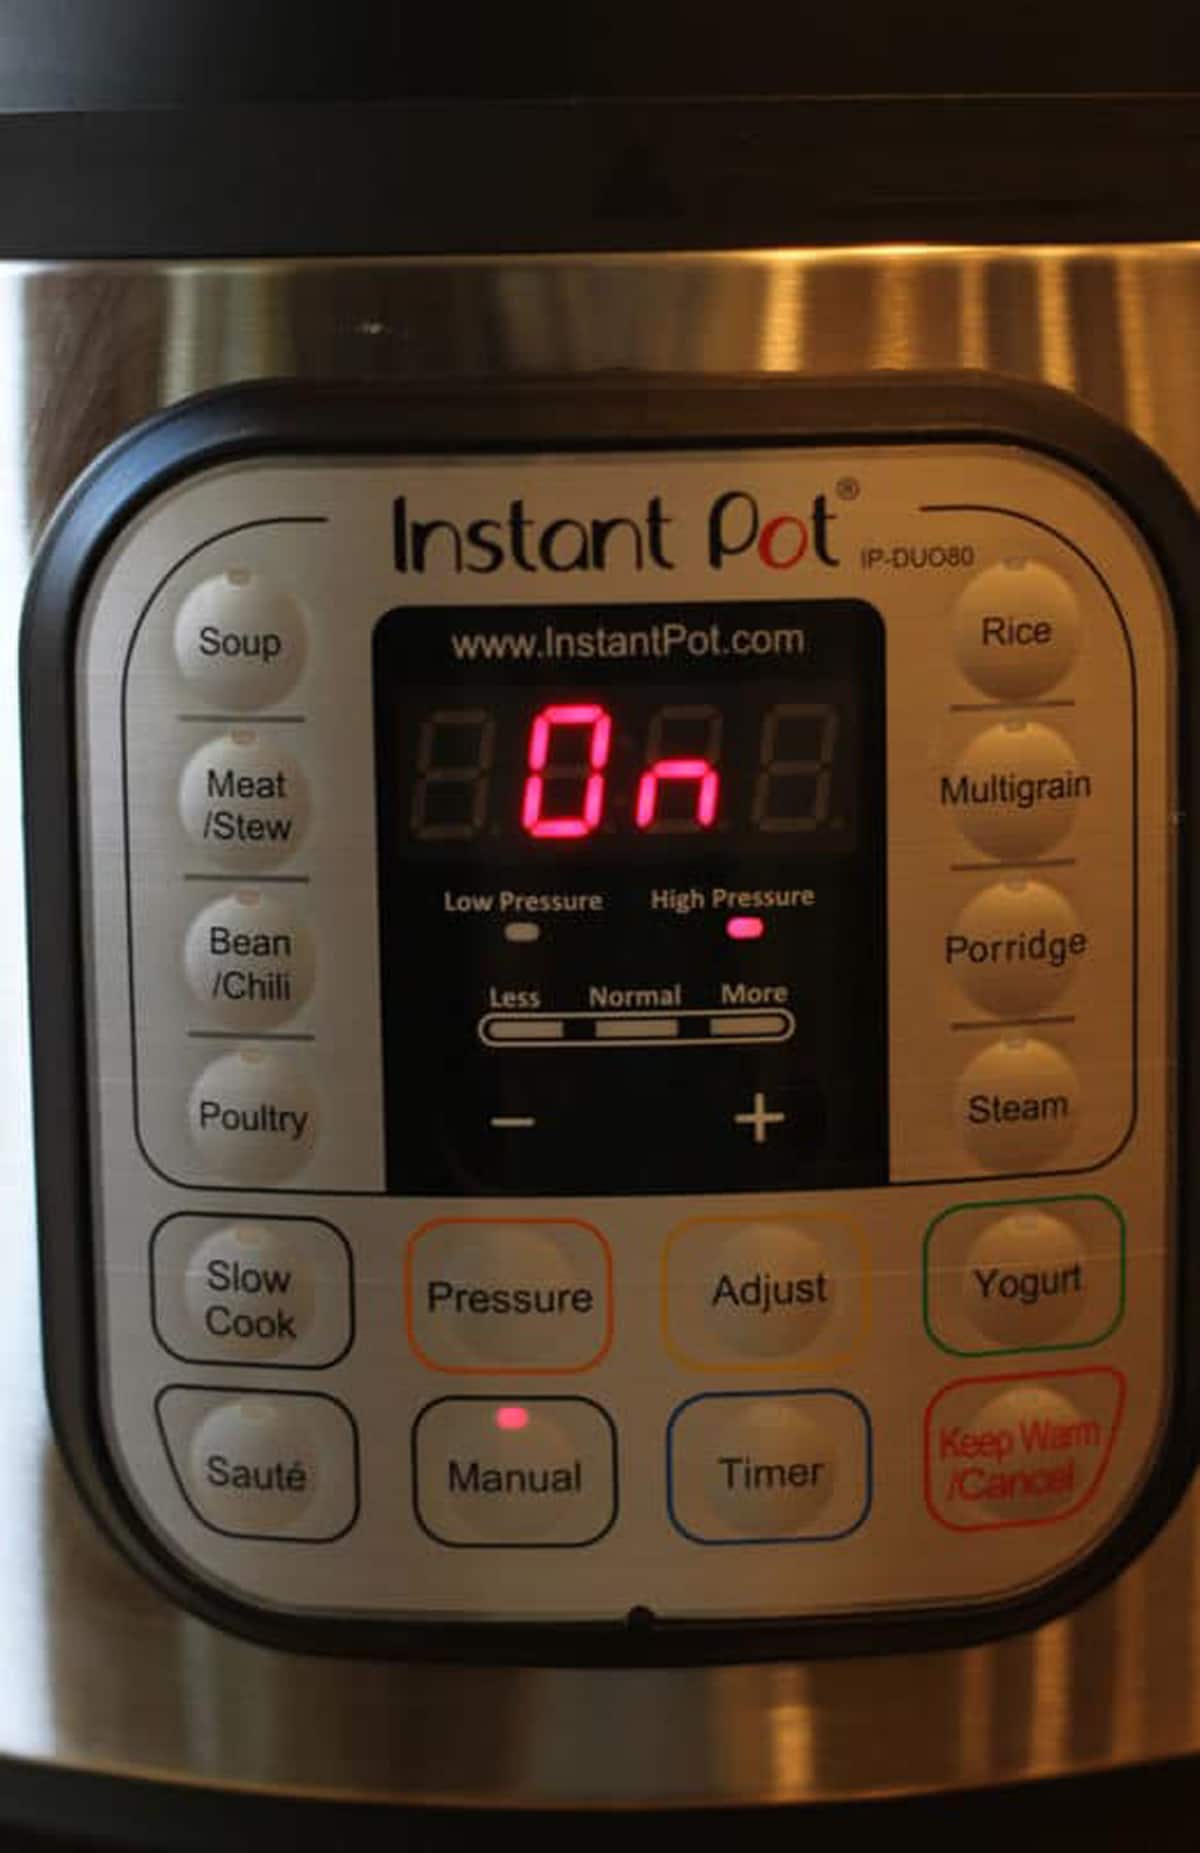 Instant Pot set to display On in Manual Mode.